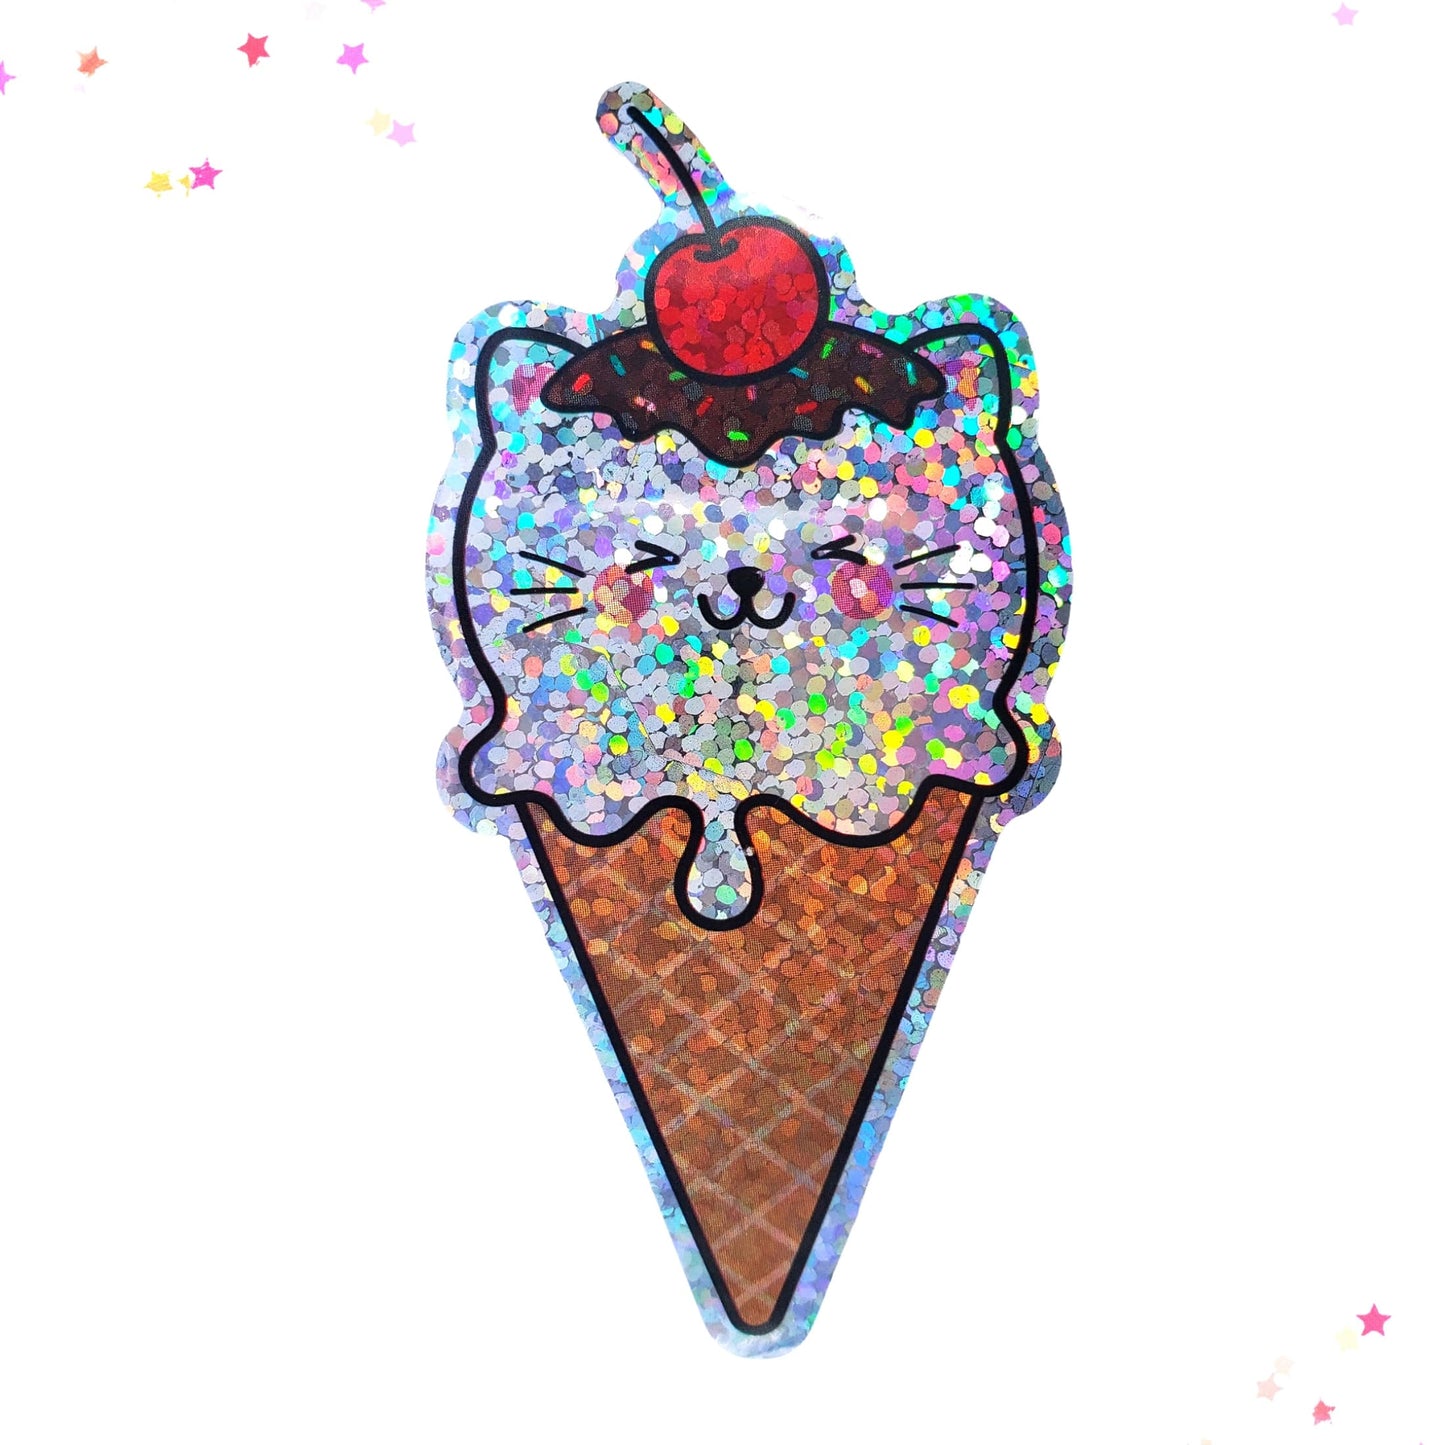 Premium Sticker - Sparkly Holographic Glitter Kitty in a Cone from Confetti Kitty, Only 2.00